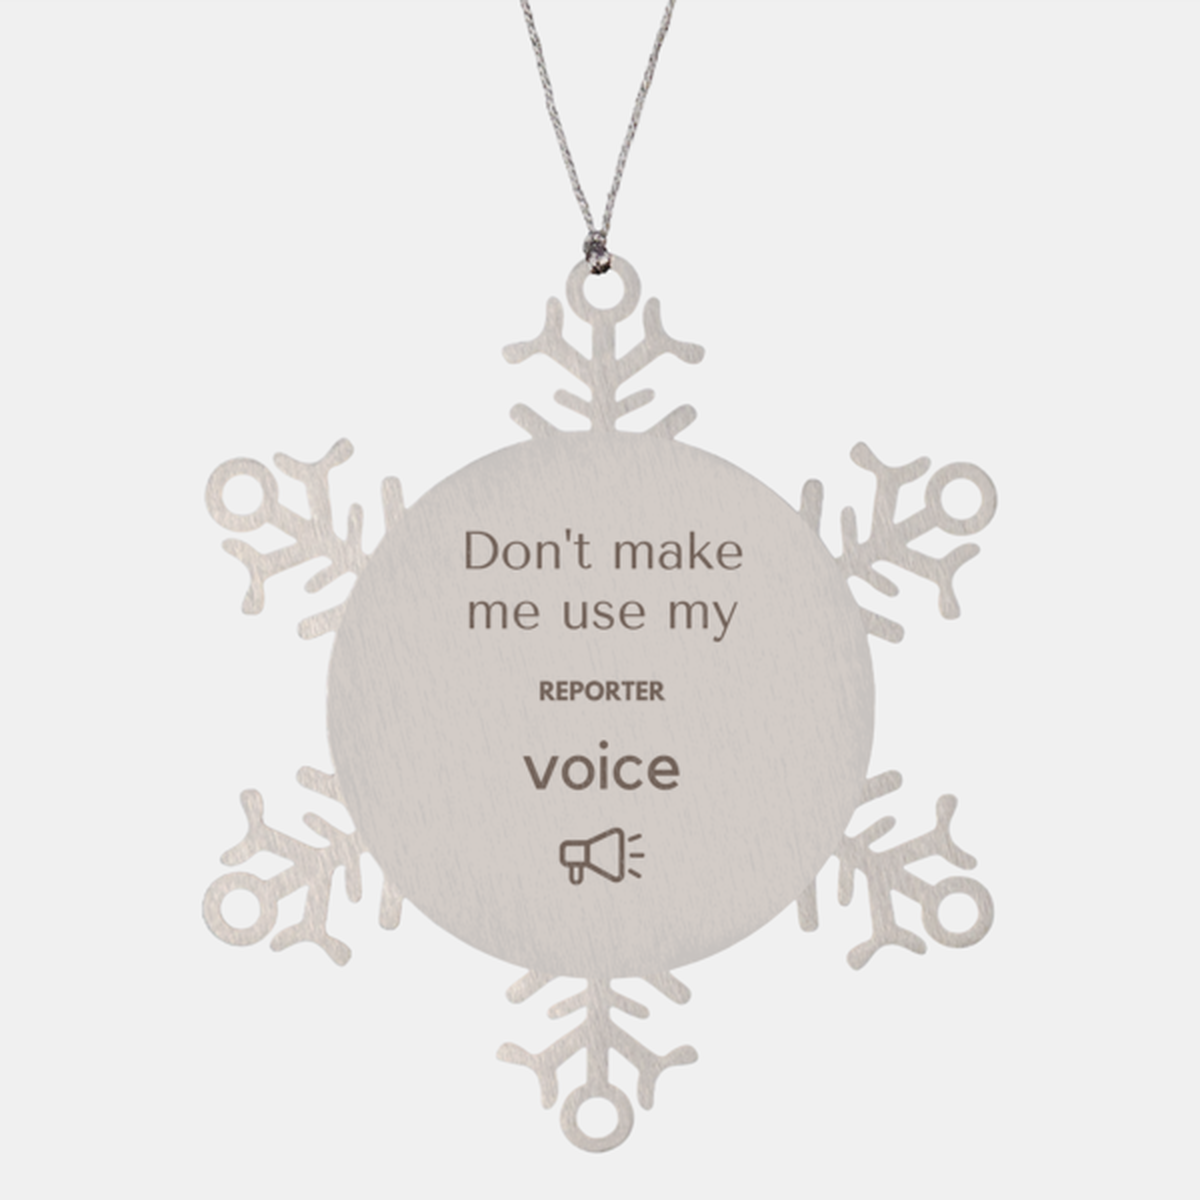 Don't make me use my Reporter voice, Sarcasm Reporter Ornament Gifts, Christmas Reporter Snowflake Ornament Unique Gifts For Reporter Coworkers, Men, Women, Colleague, Friends